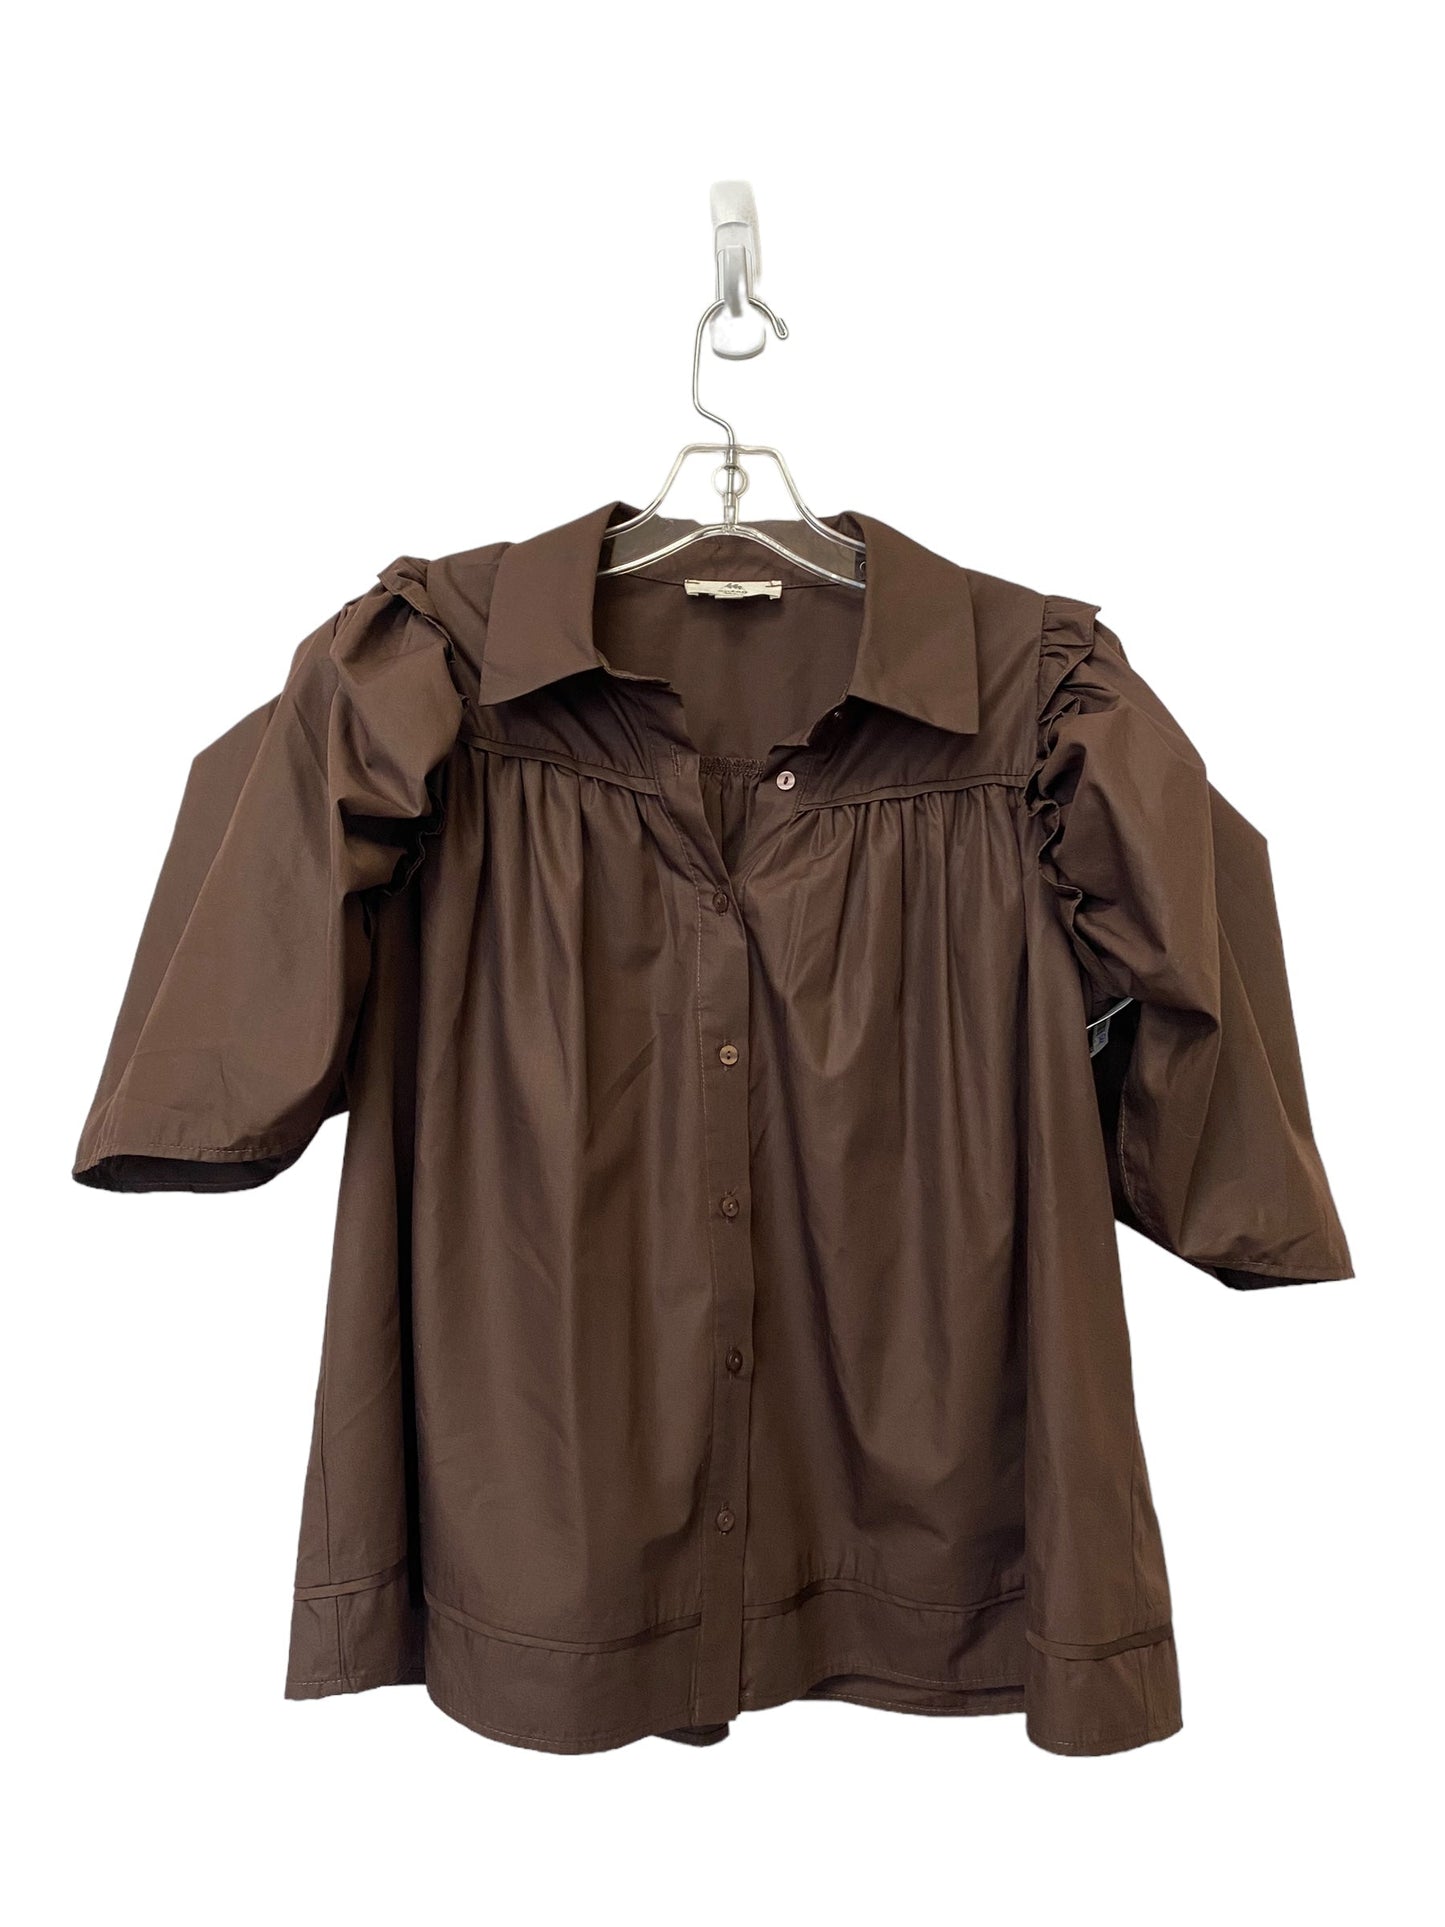 Brown Top Short Sleeve Entro, Size S